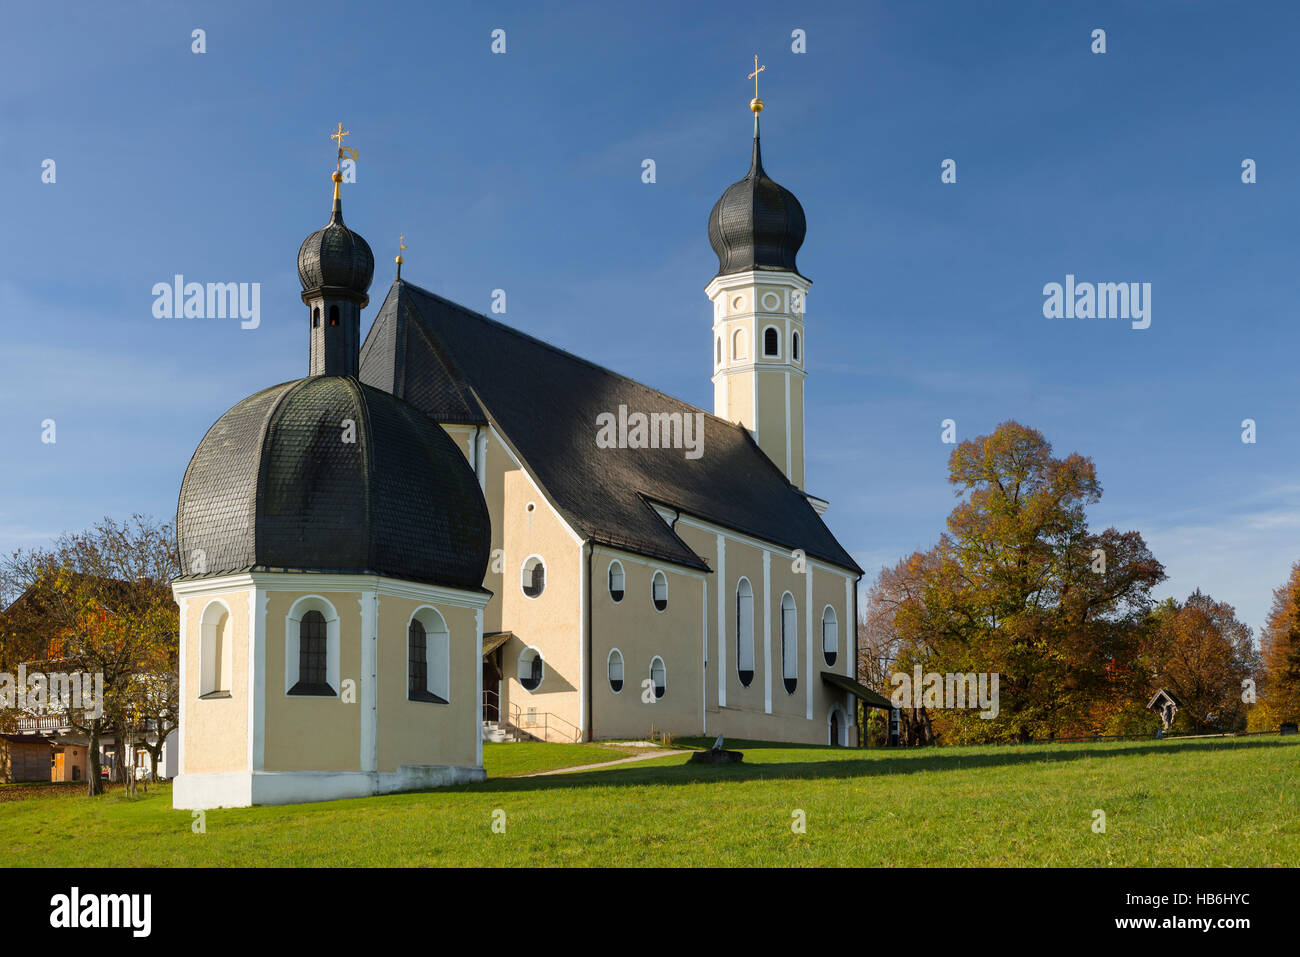 Colourful facade, steeples and roof of the baroque Wilparting pilgrimage church and chapel against the blue sky in the morning sun, Bavaria, Germany Stock Photo